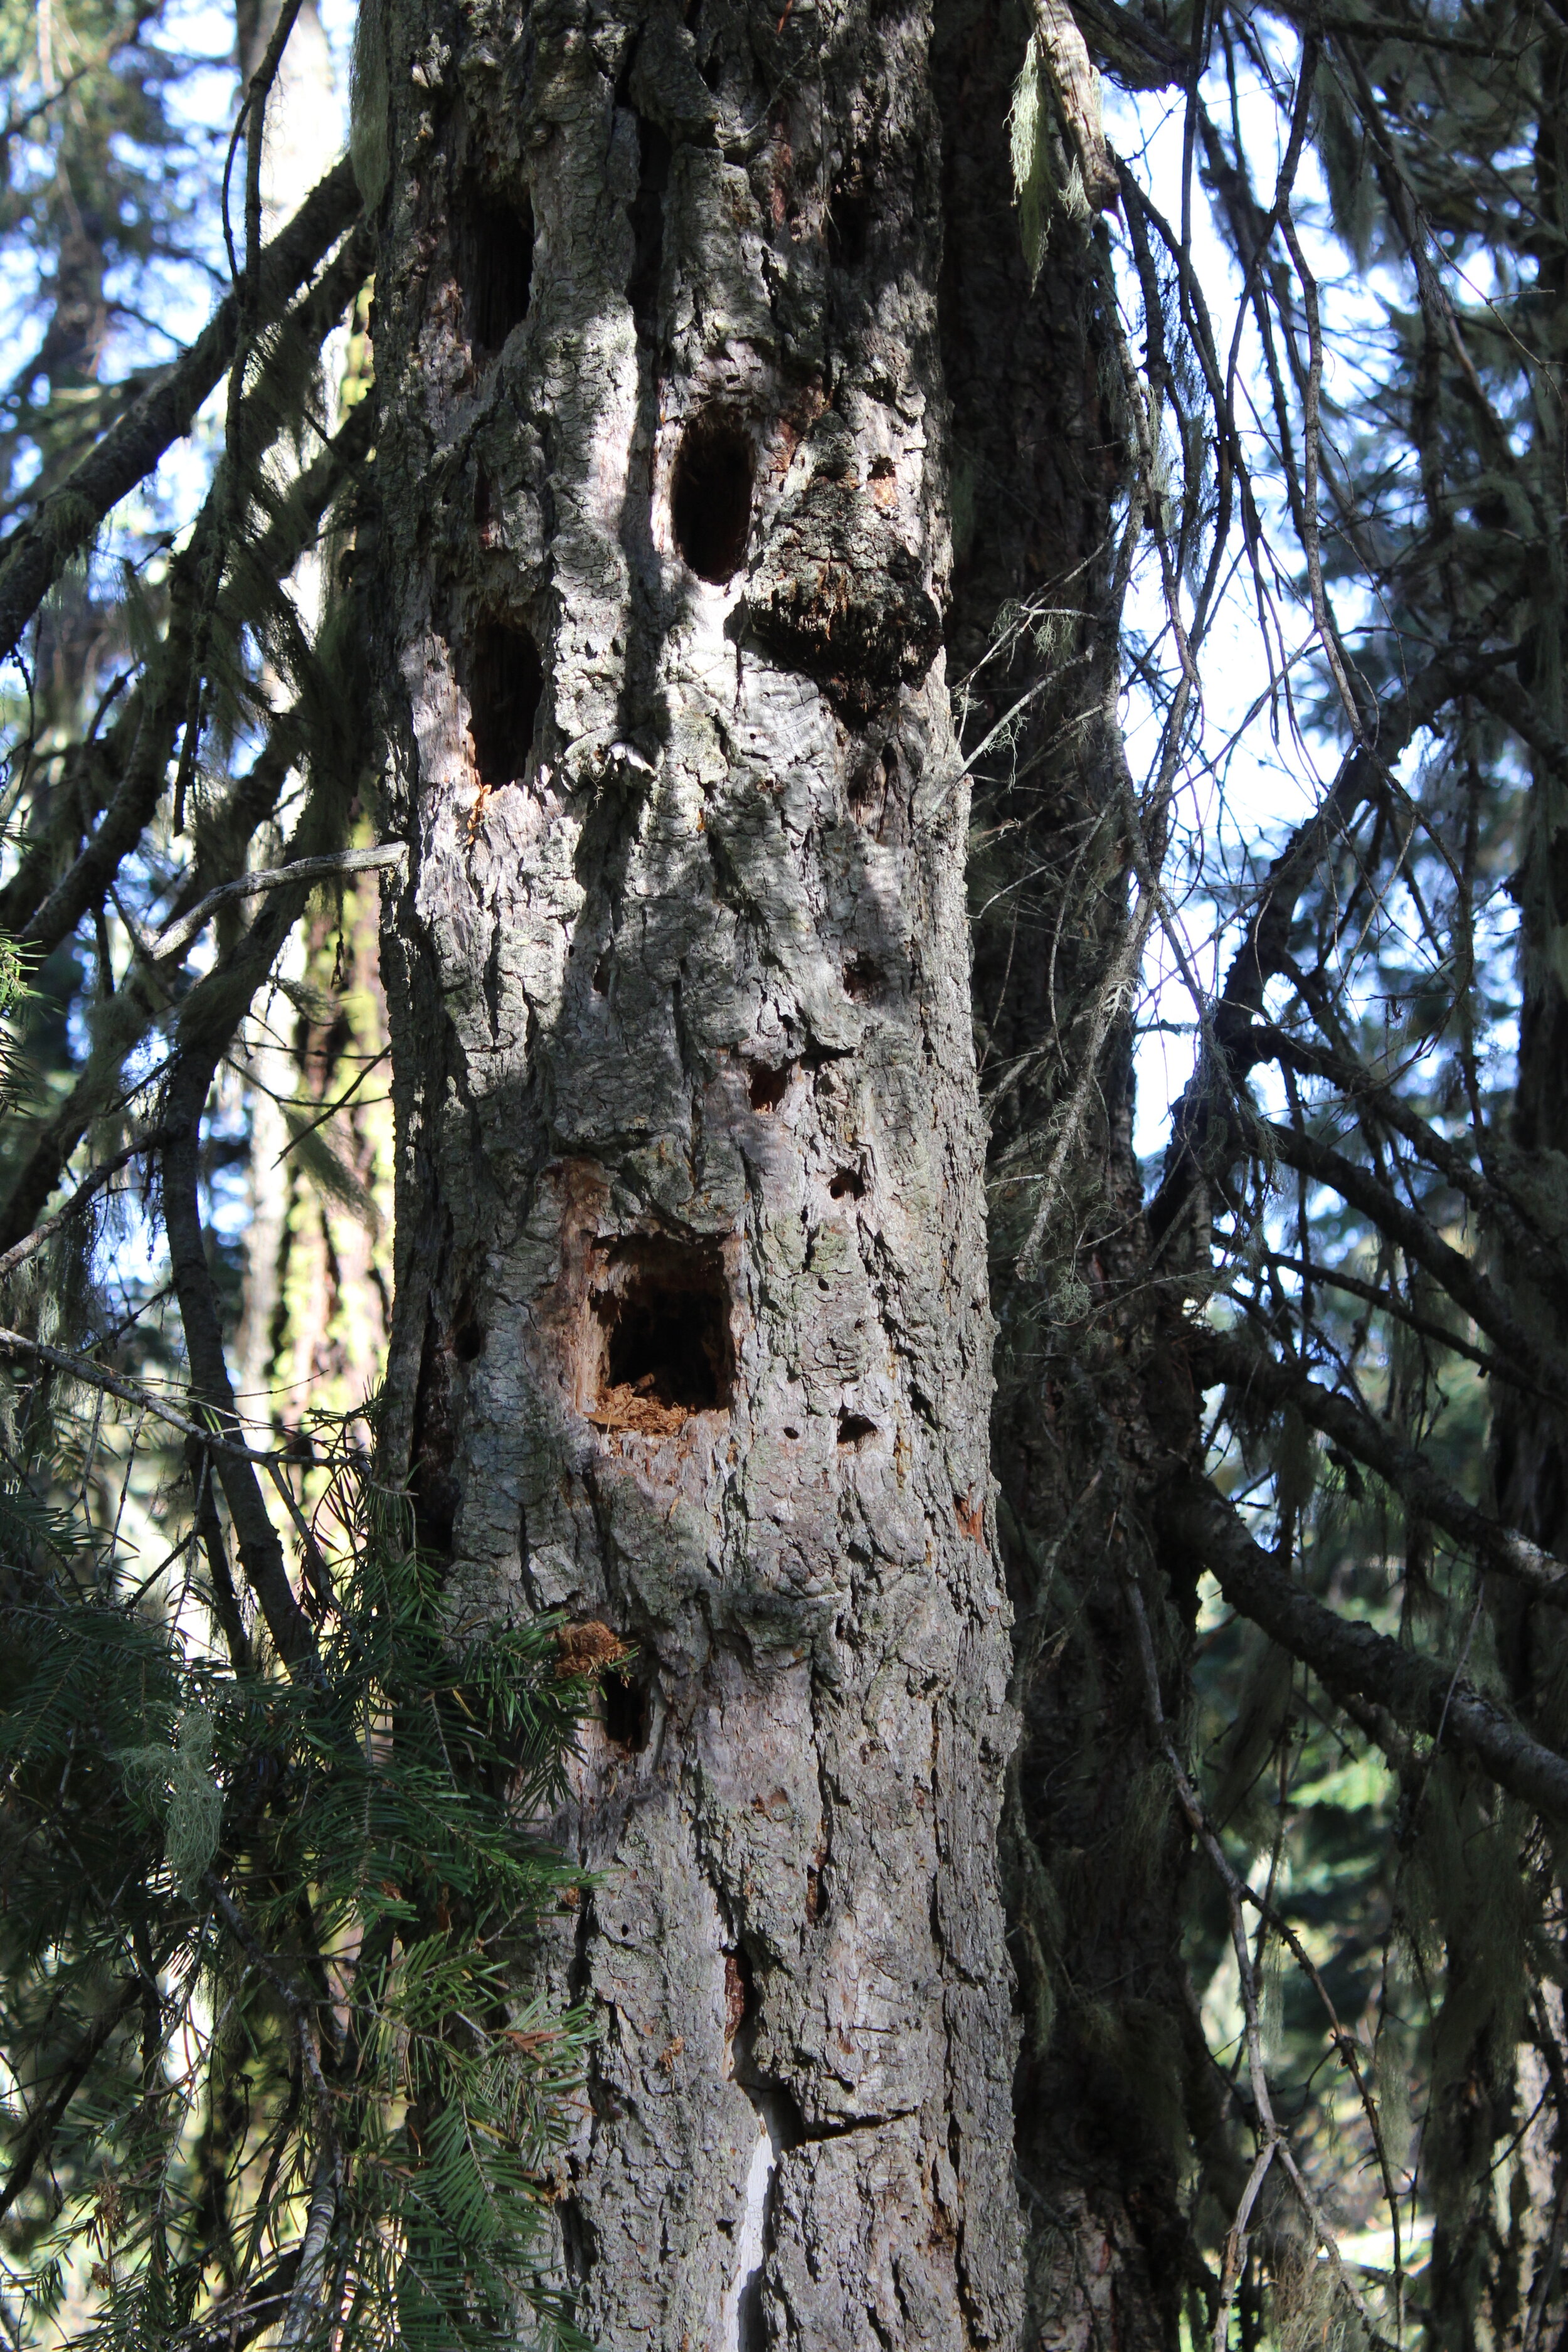  Pileated woodpeckers make large rectangular holes in trees like this. 